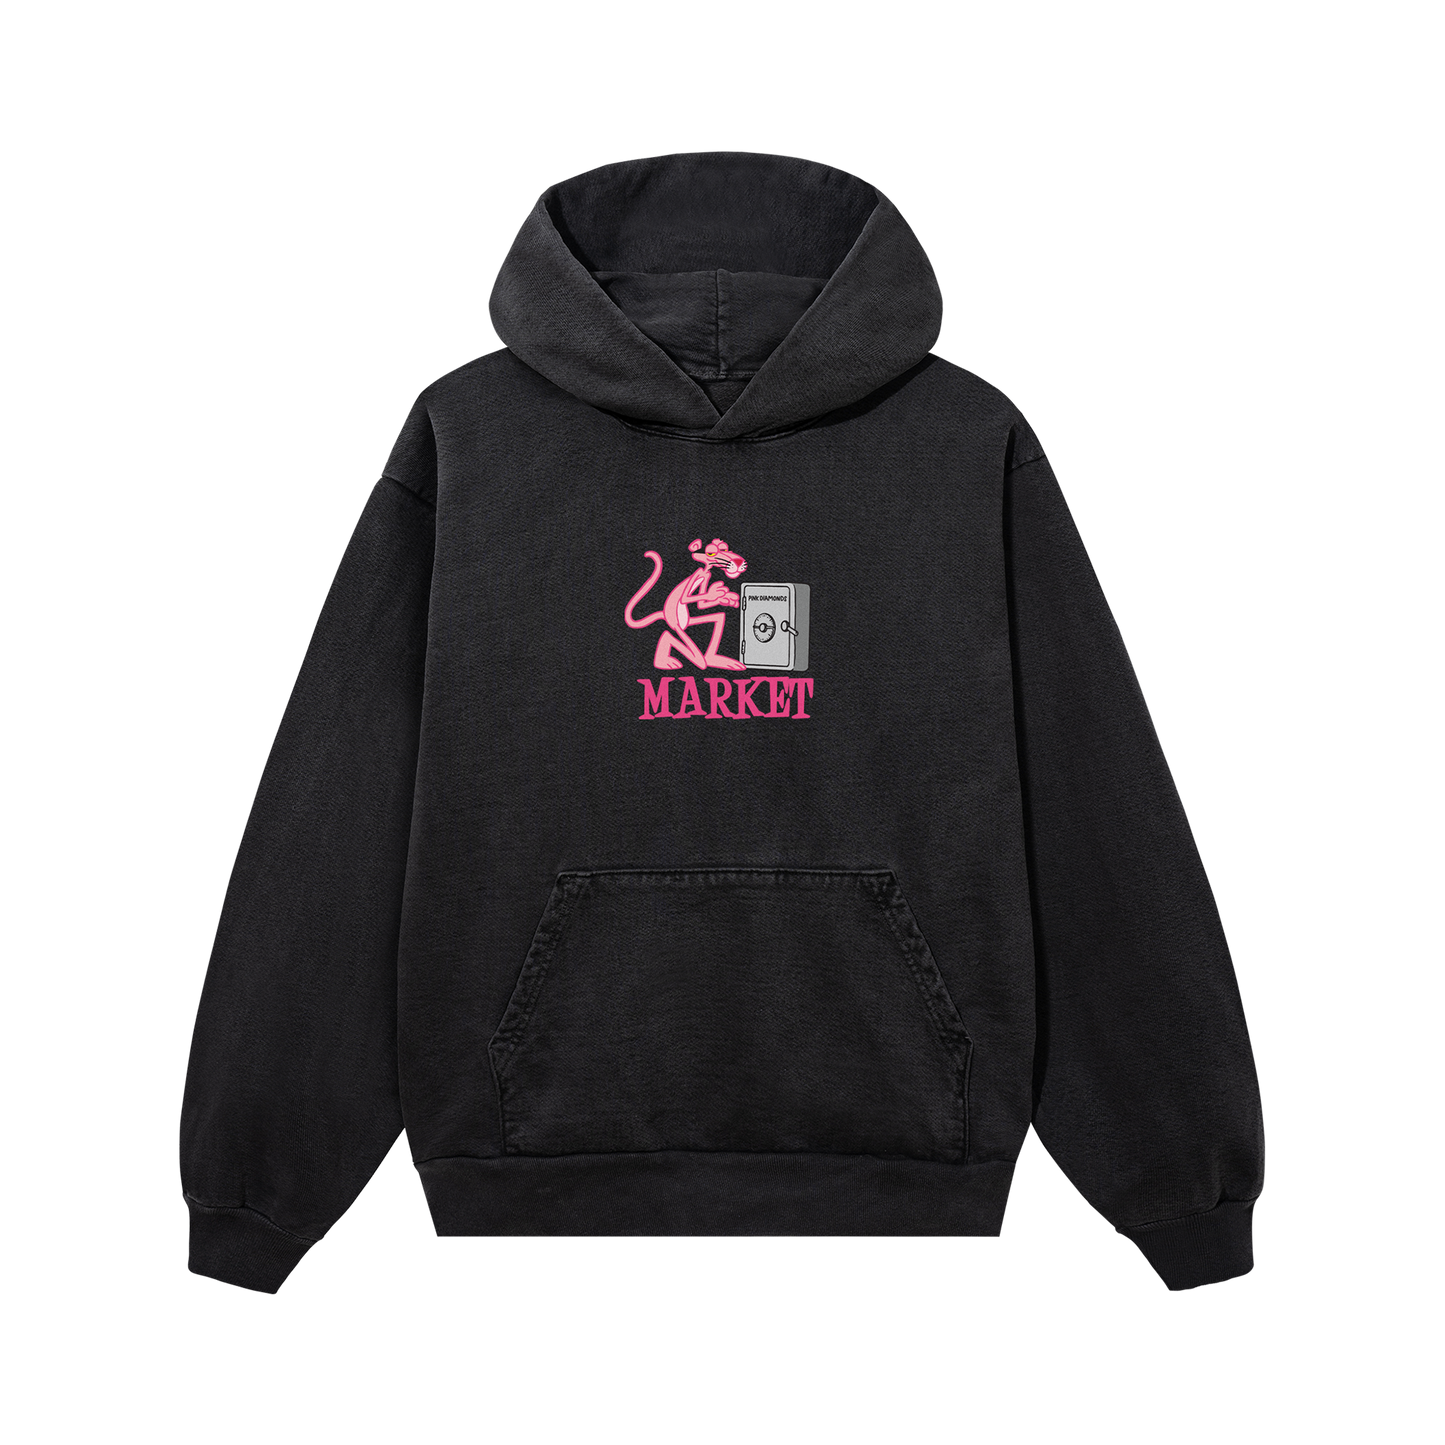 PINK PANTHER CALL MY LAWYER HOODIE